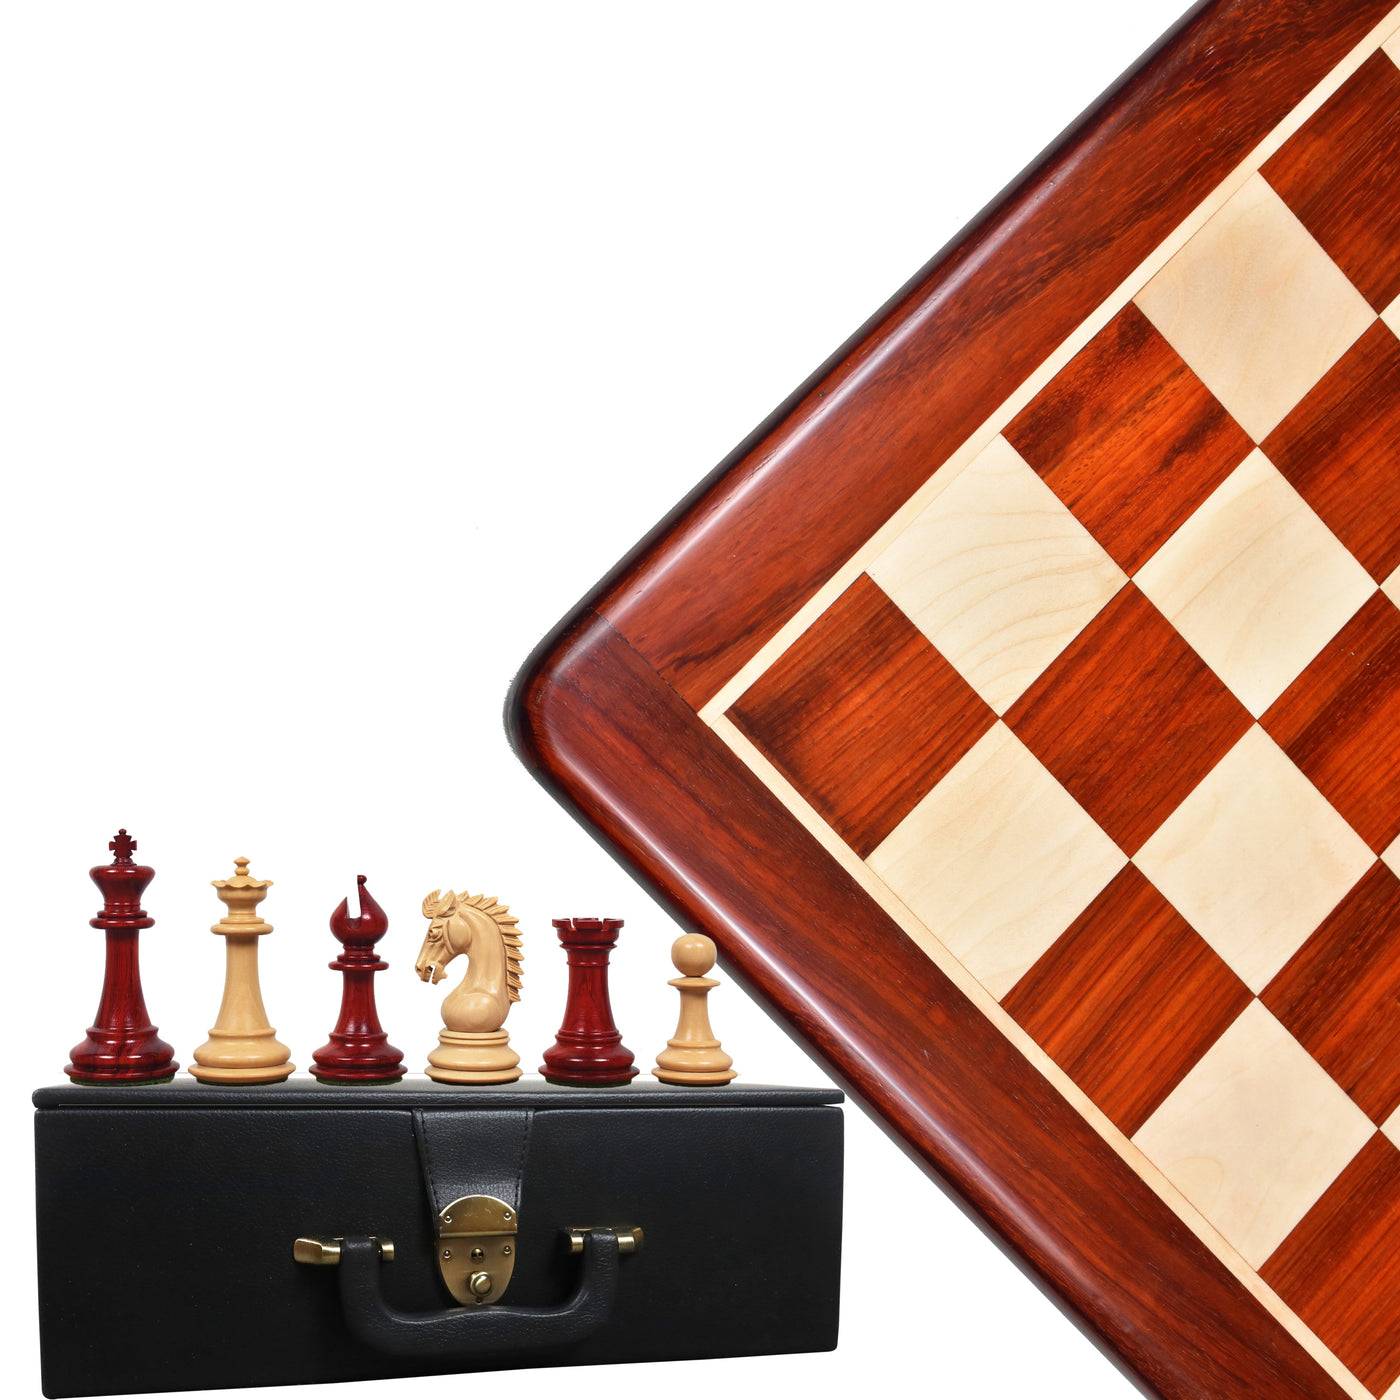 3.7" Emperor Series Staunton Chess Bud Rosewood Pieces with 21" Bud Rosewood & Maple Wood Chess board and Leatherette Coffer Storage Box